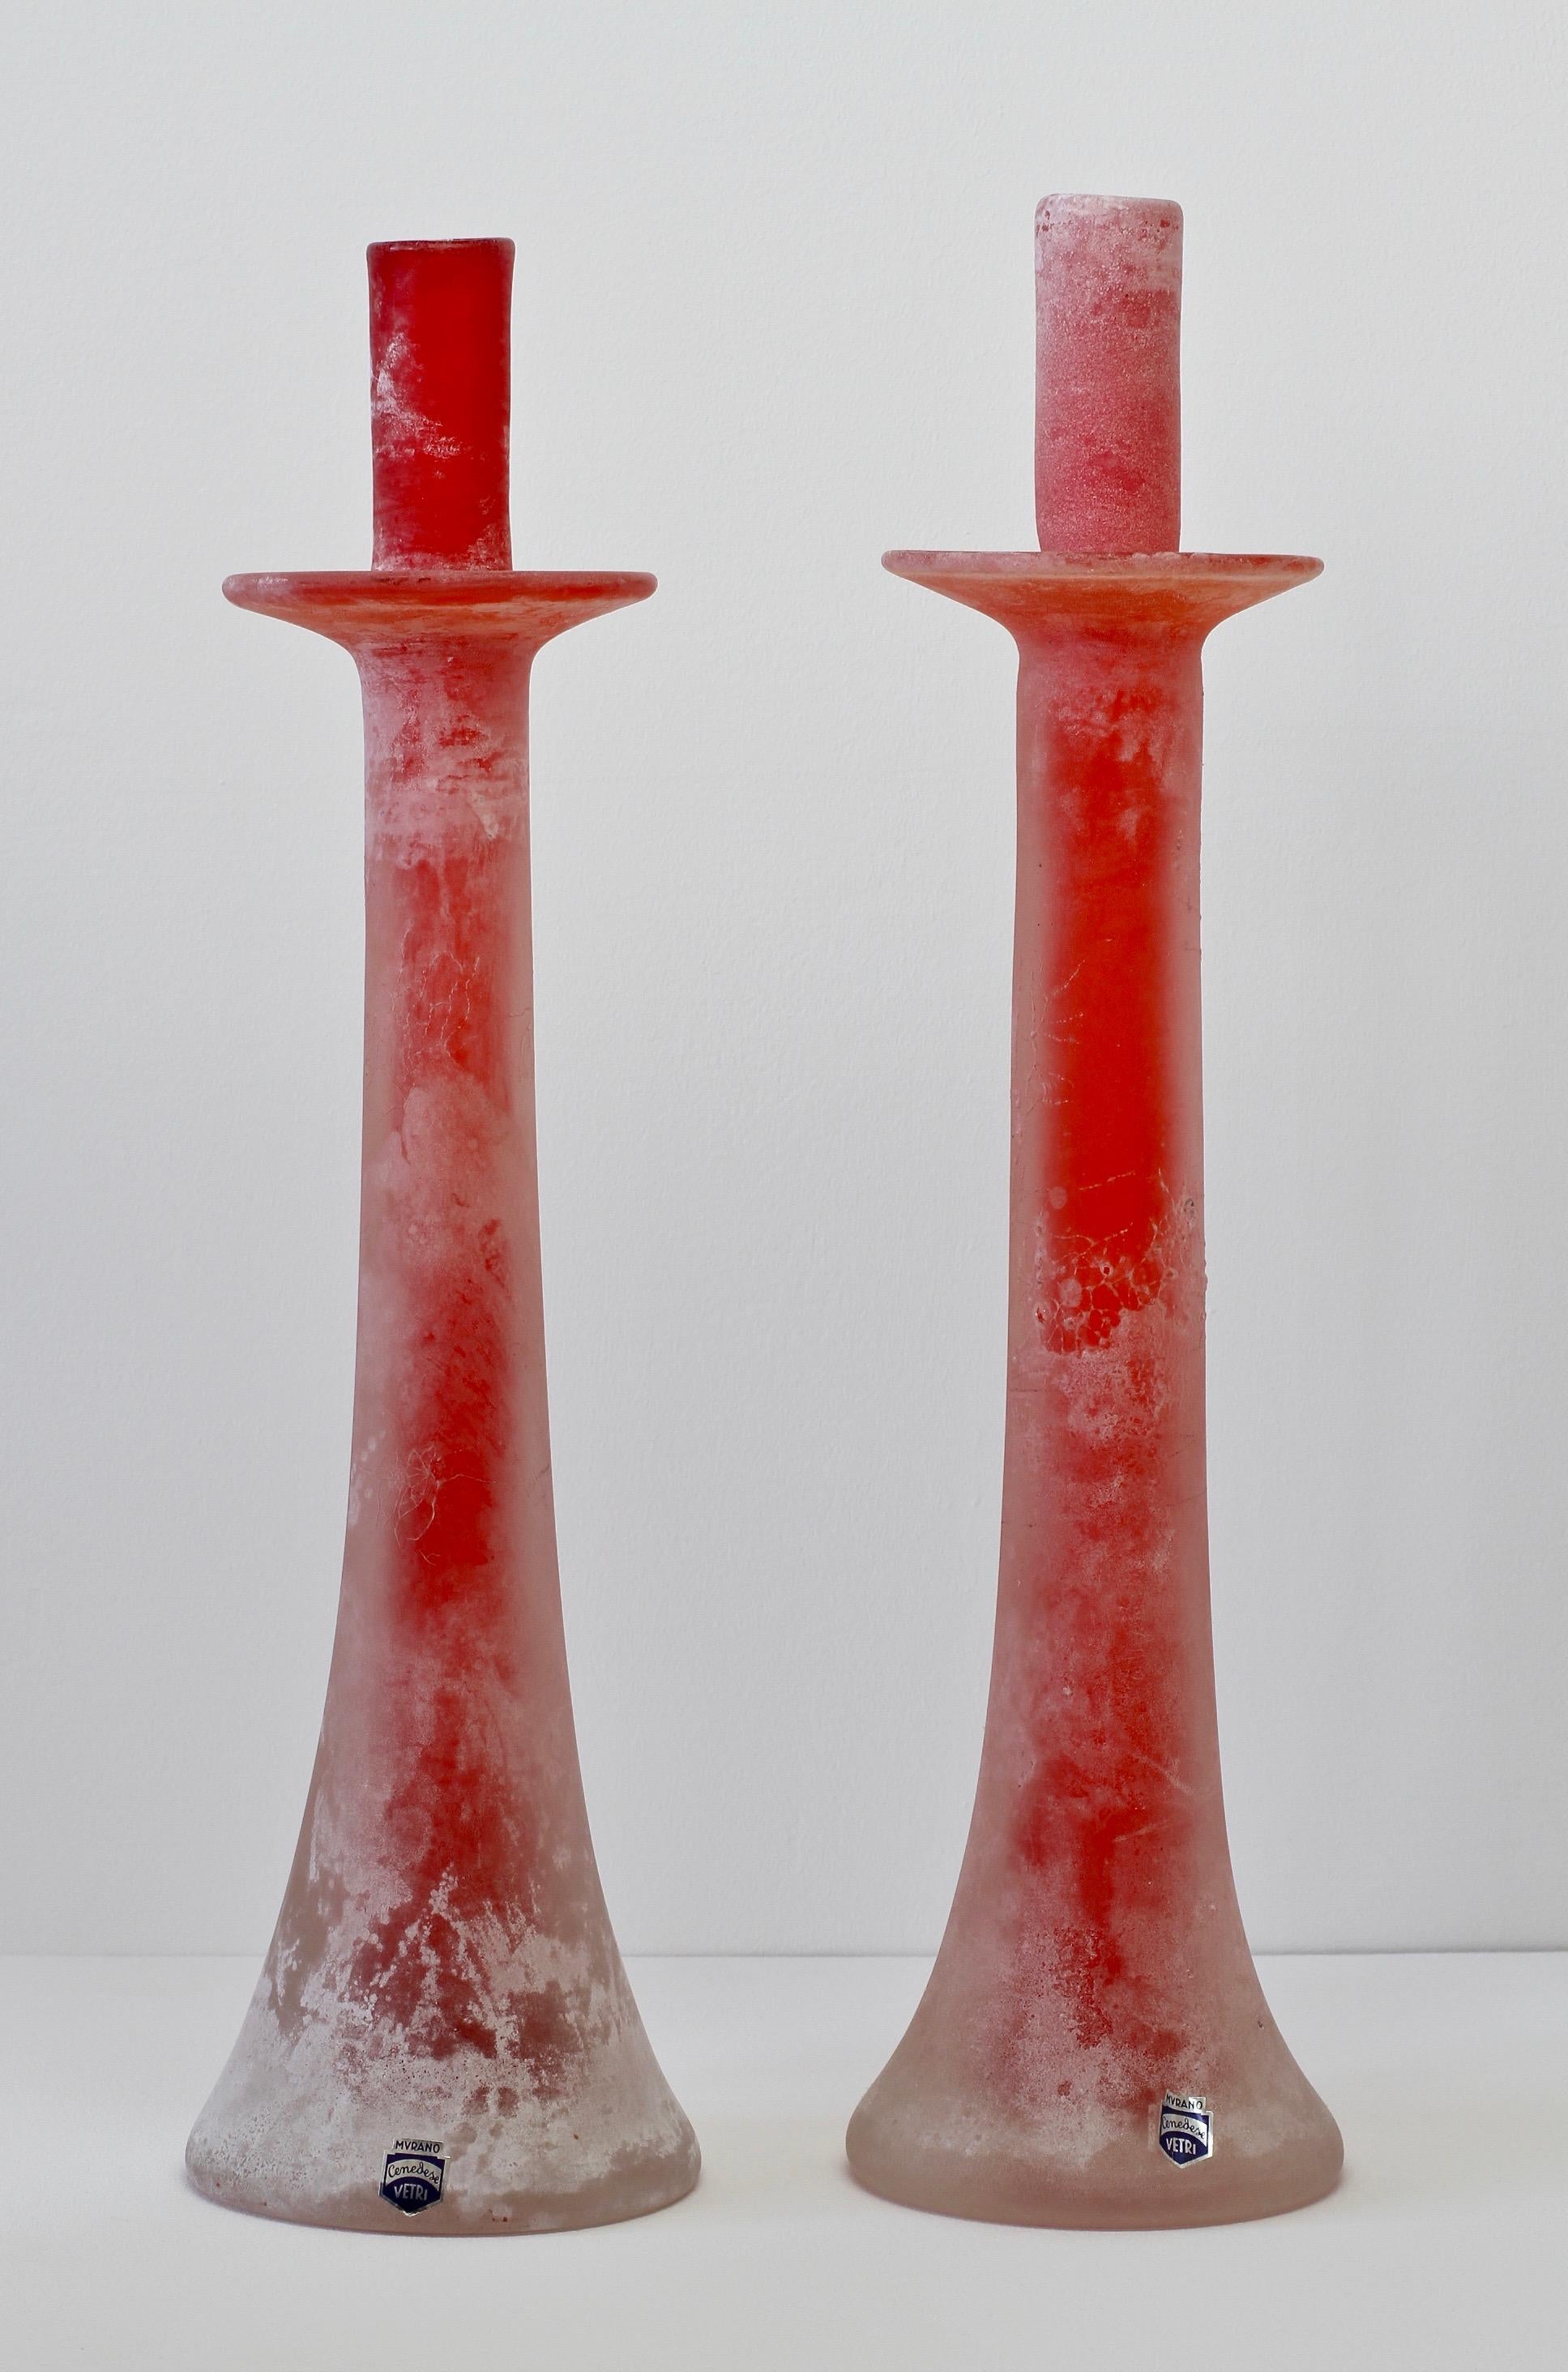 Beautiful, tall and rare signed pair of Scavo glass candlestick holders by Cenedese Vetri Murano glass in collector's condition. Made of red Murano art glass featuring the 'scavo' technique, giving the glass the resemblance of historic roman glass